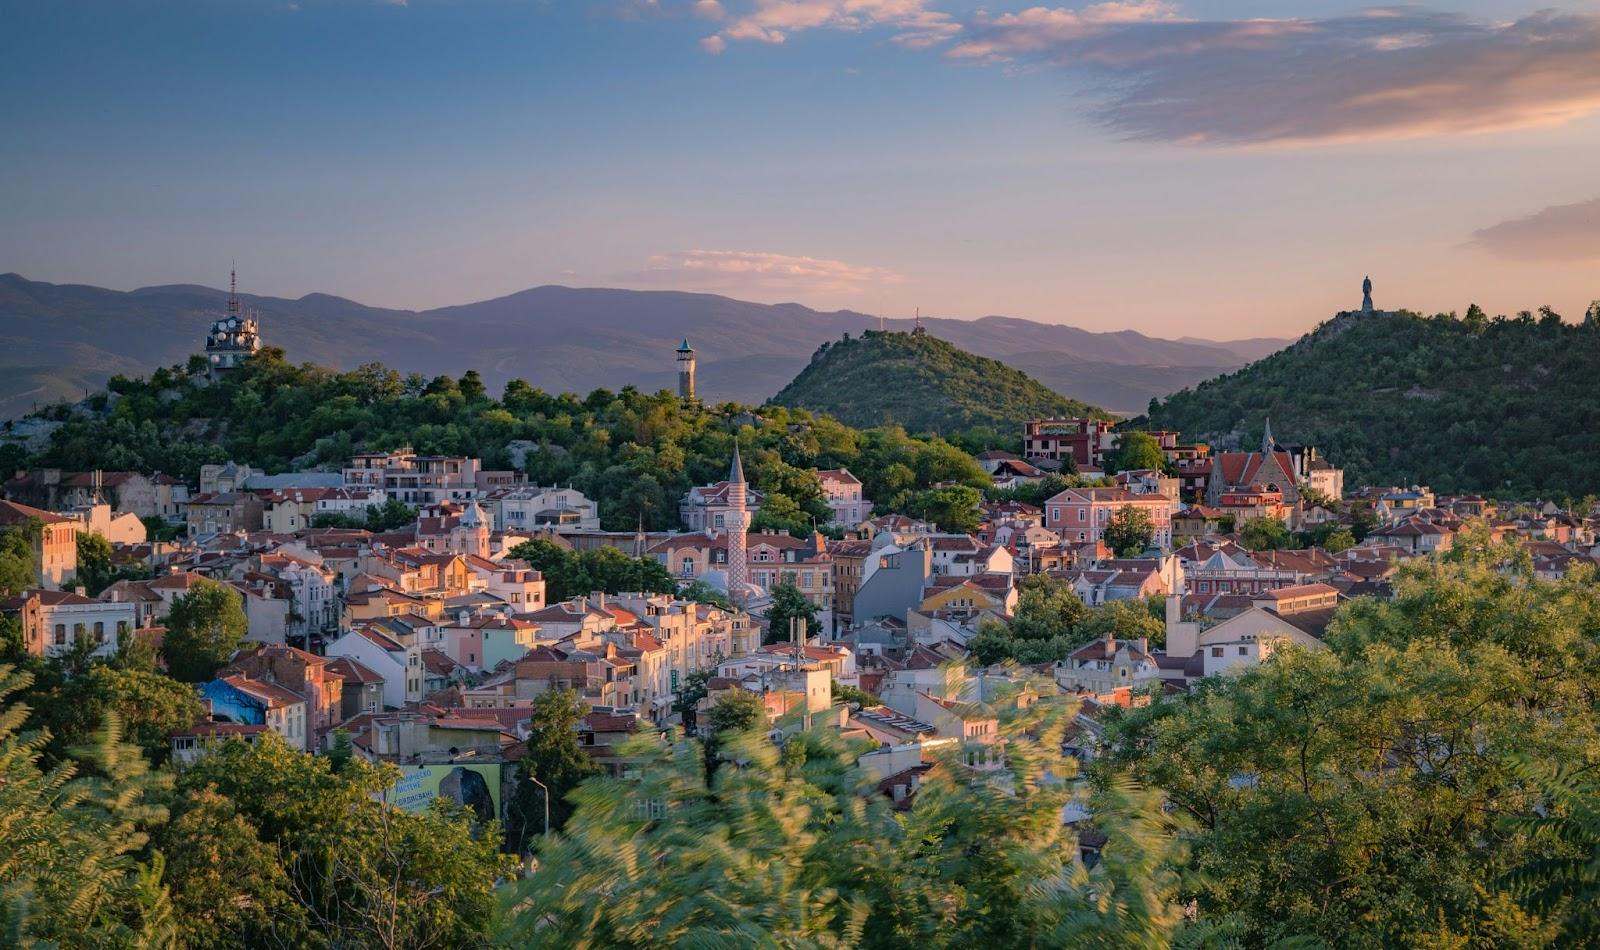 a small town surrounded by trees and mountains - Plovdiv